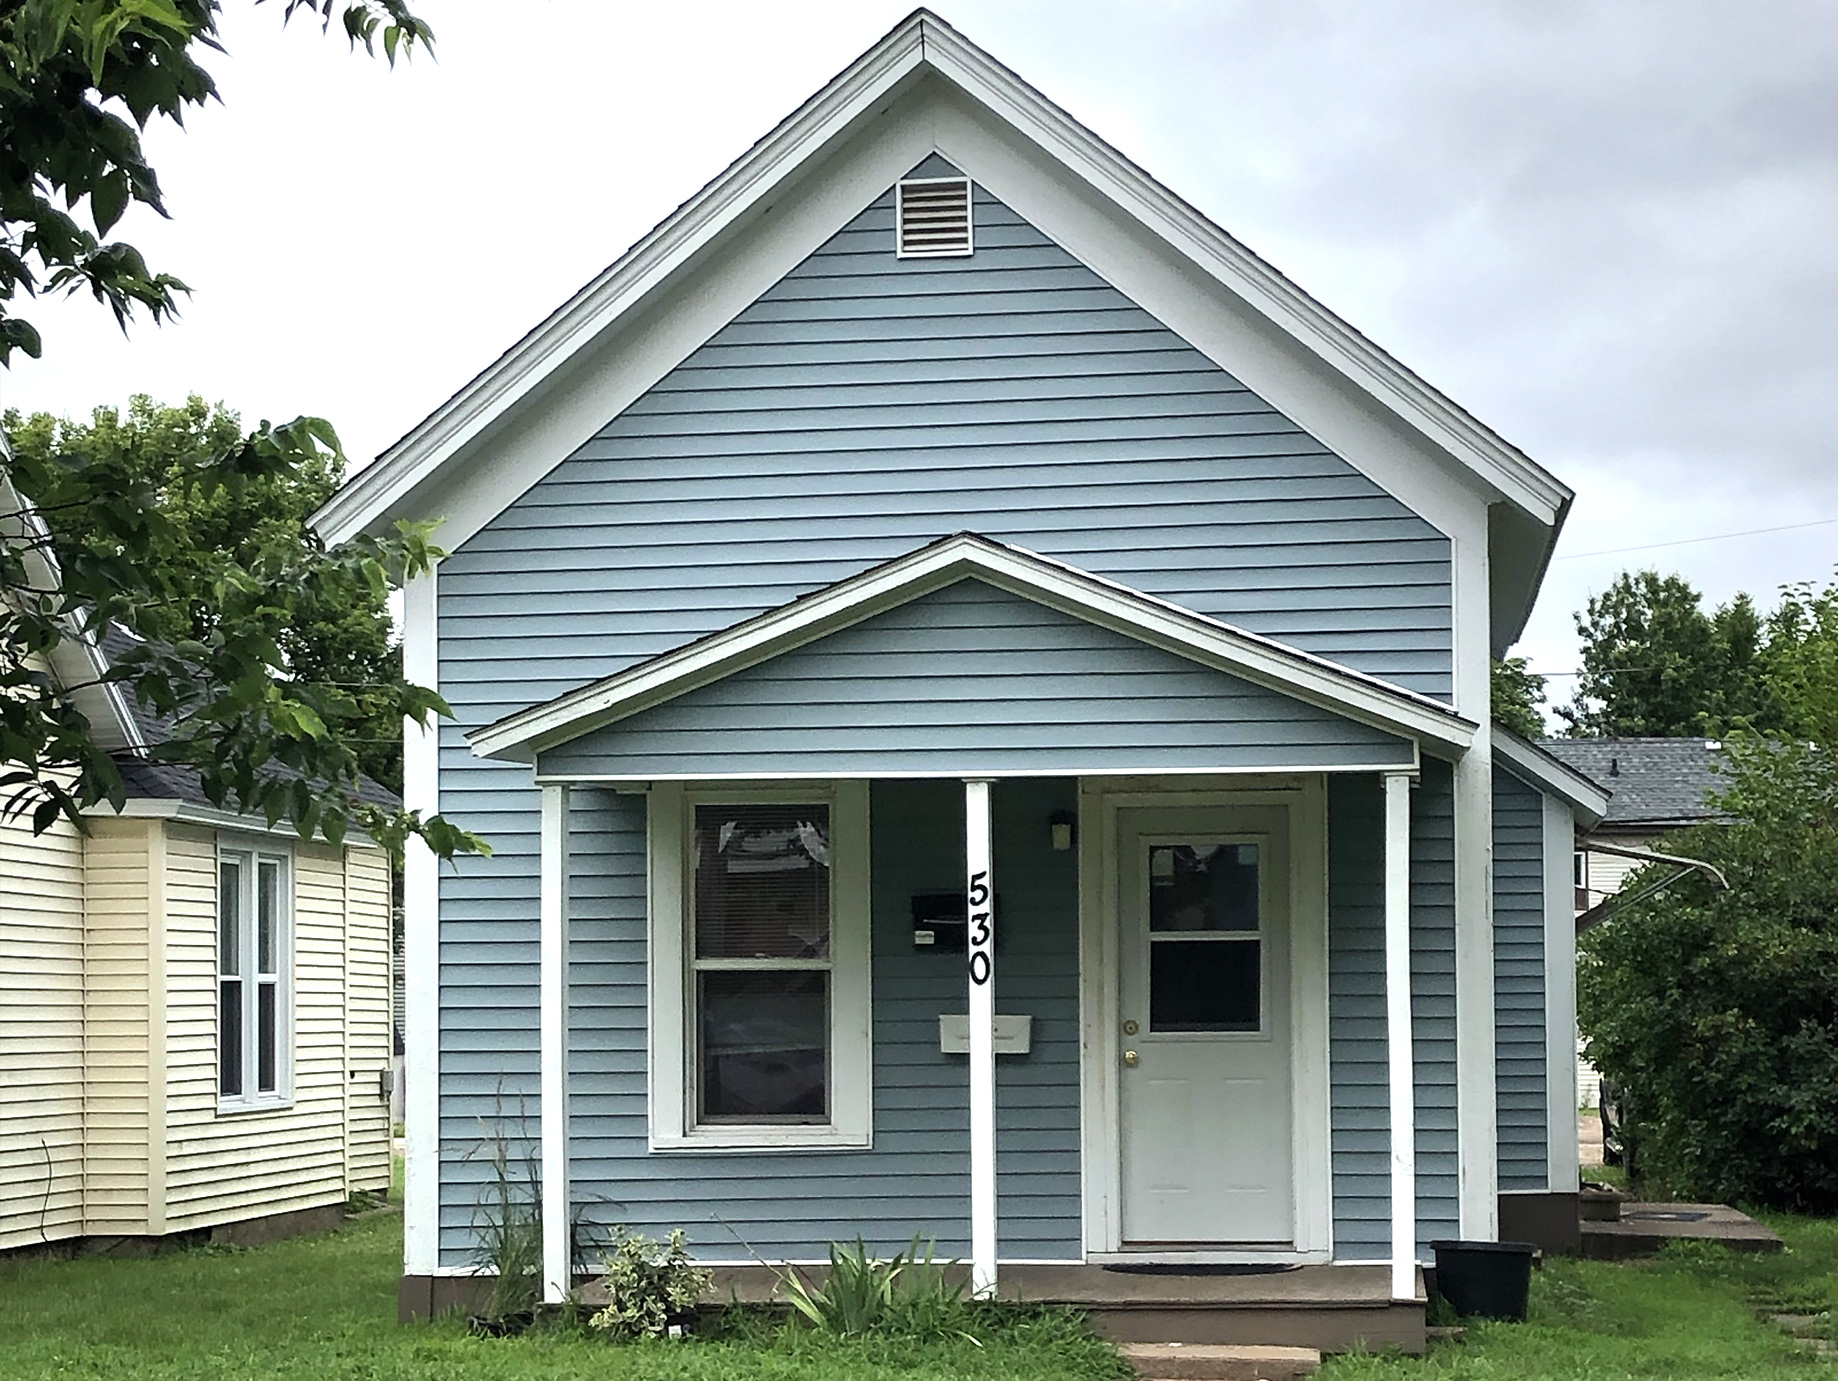 530 Chippewa St, Eau Claire, Wisconsin 54703, 1 Bedroom Bedrooms, ,1 BathroomBathrooms,Single Family,Apartment,530 Chippewa St ,1082